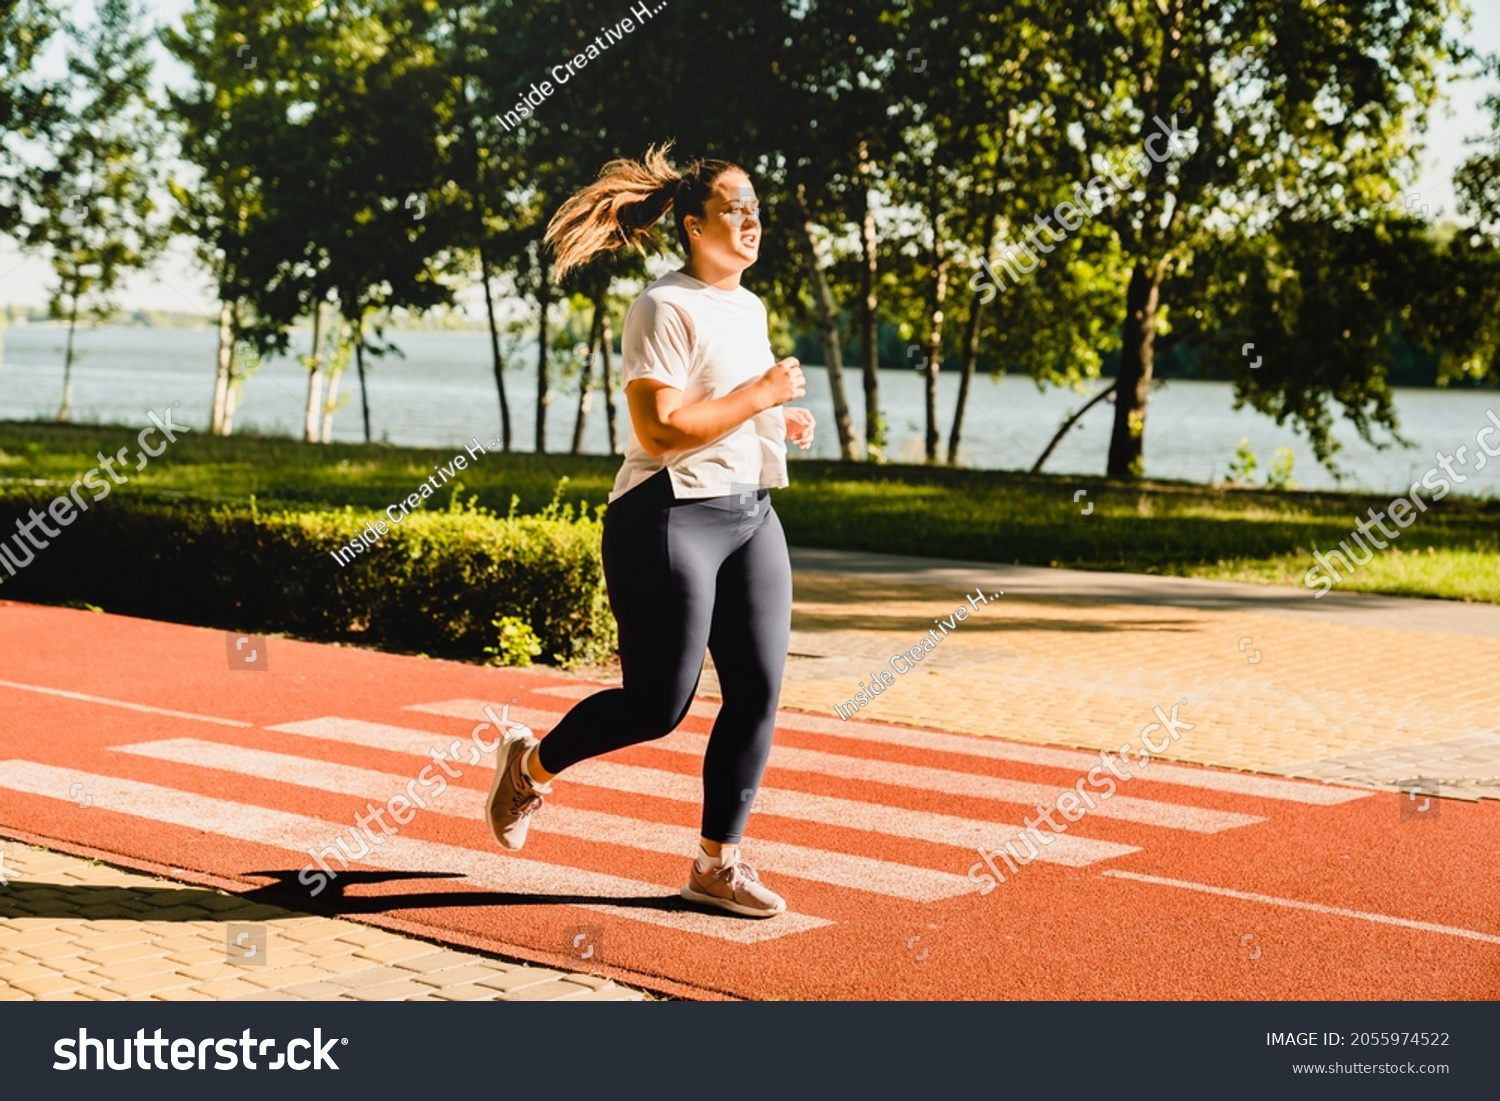 Full size portrait of a body positive plus-size plump woman athlete jogging running in fitness outfit, losing weight while listening to music in stadium outdoors #2055974522